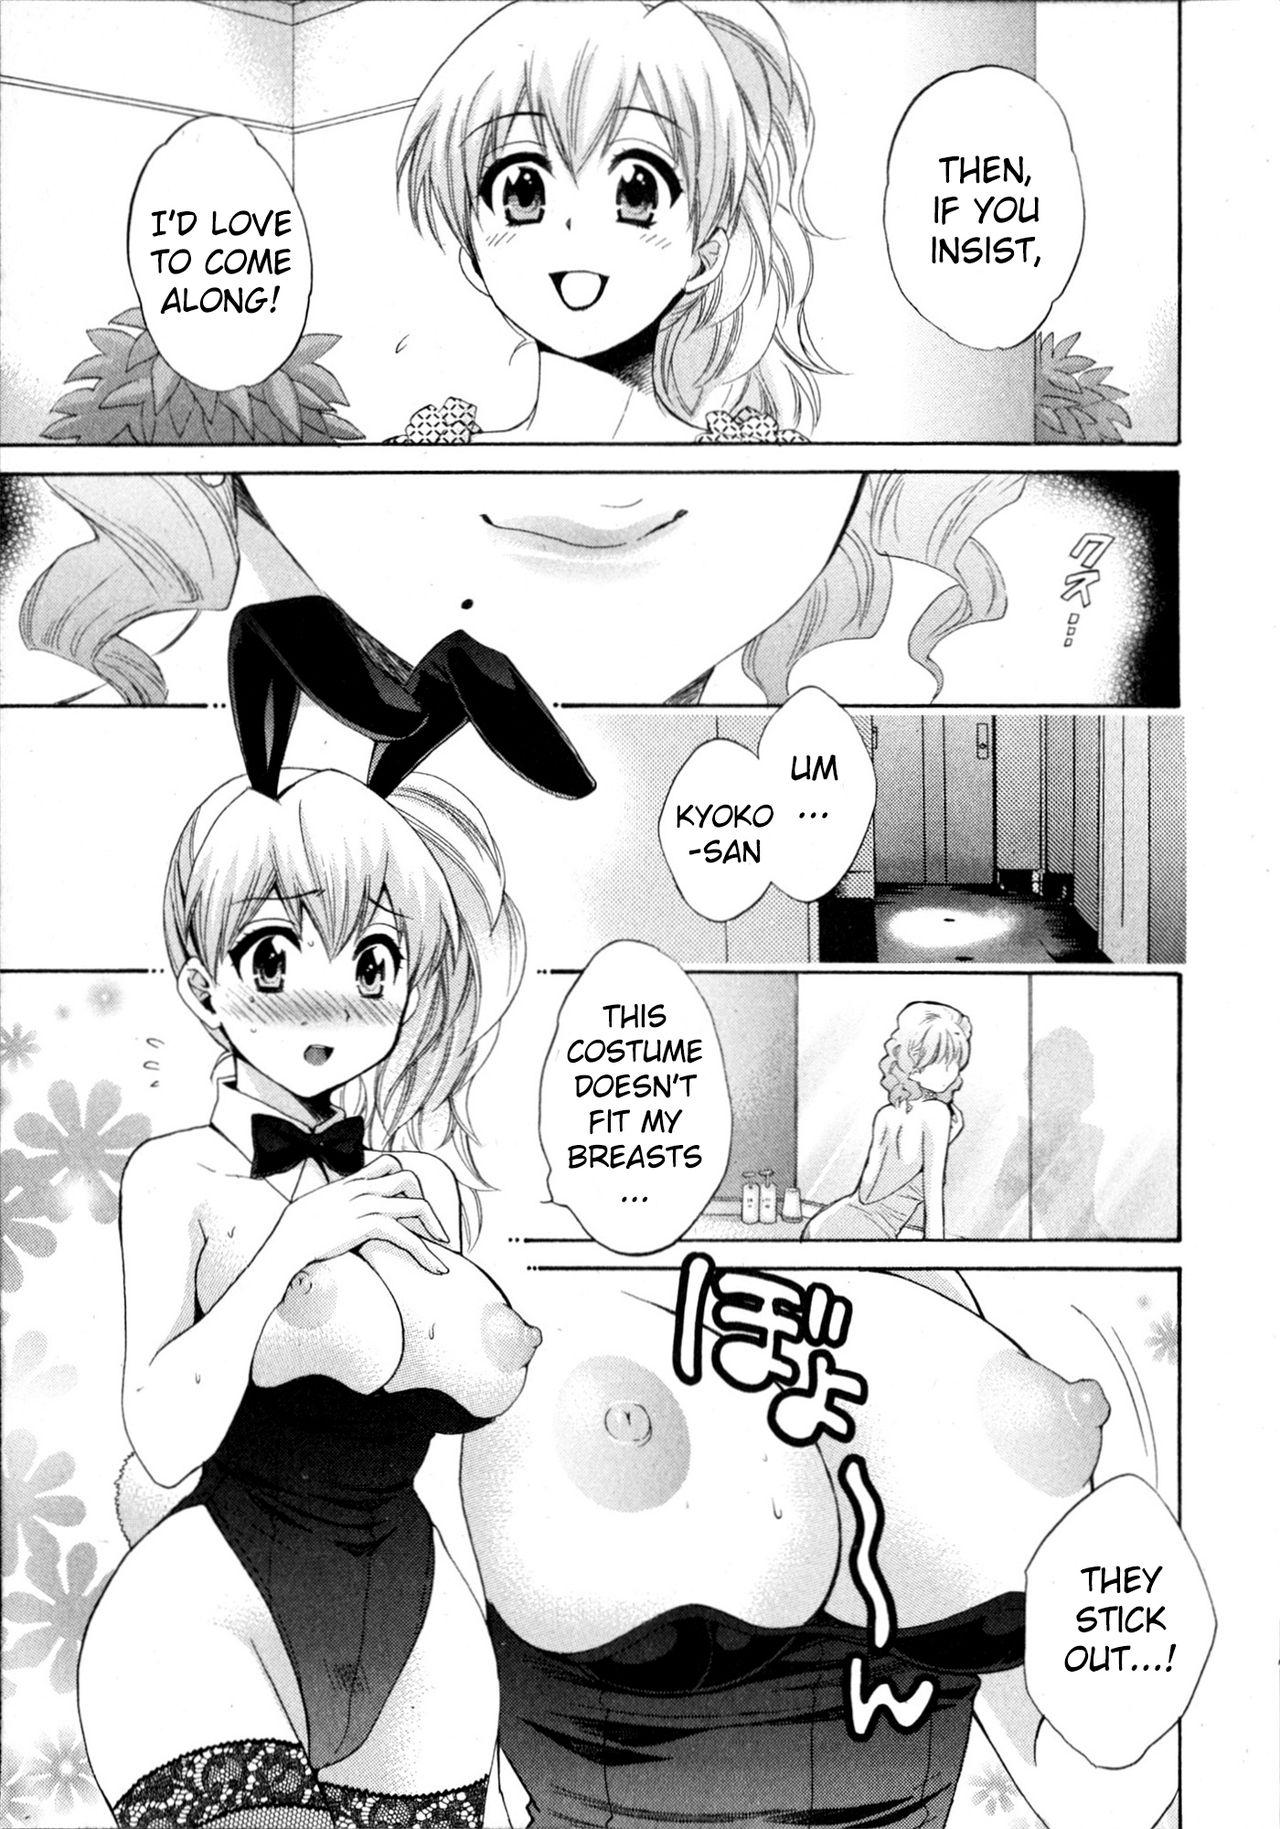 Hot Wife Tenshi no Marshmallow 4 Ch. 25-27 Jerk Off - Page 9